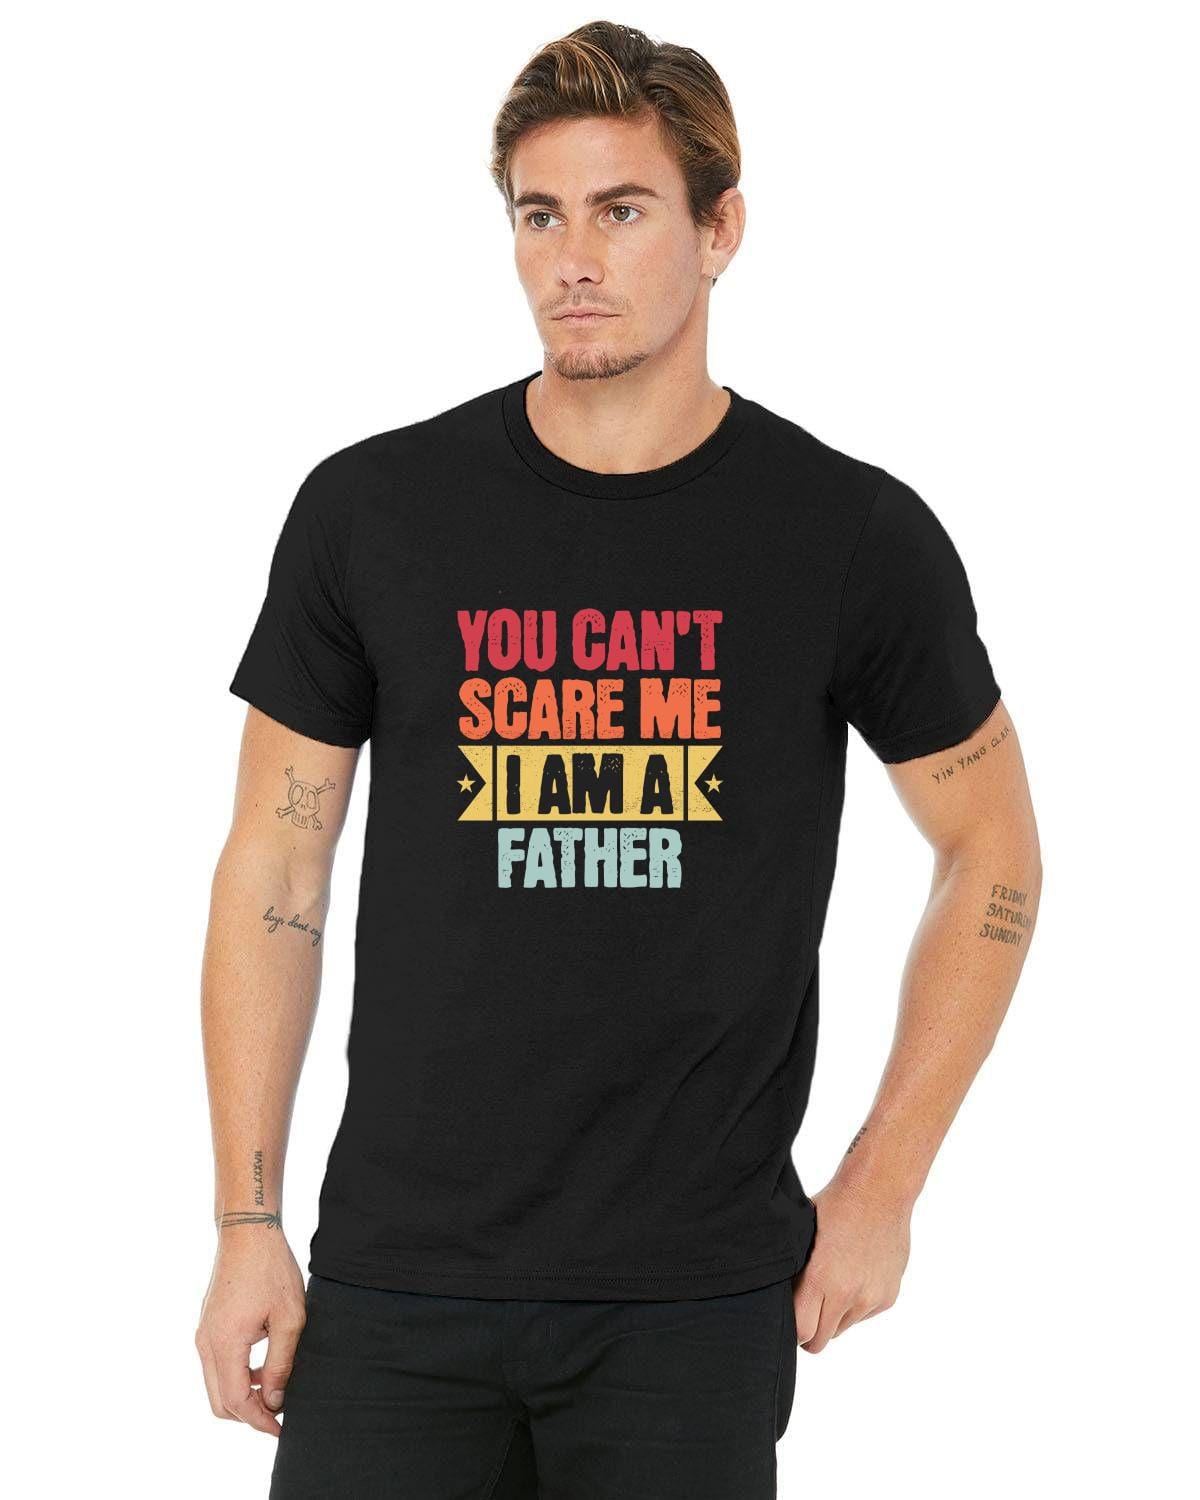 You Can't Scare Me T-Shirt - Father's Day, Birthday, Any Day!